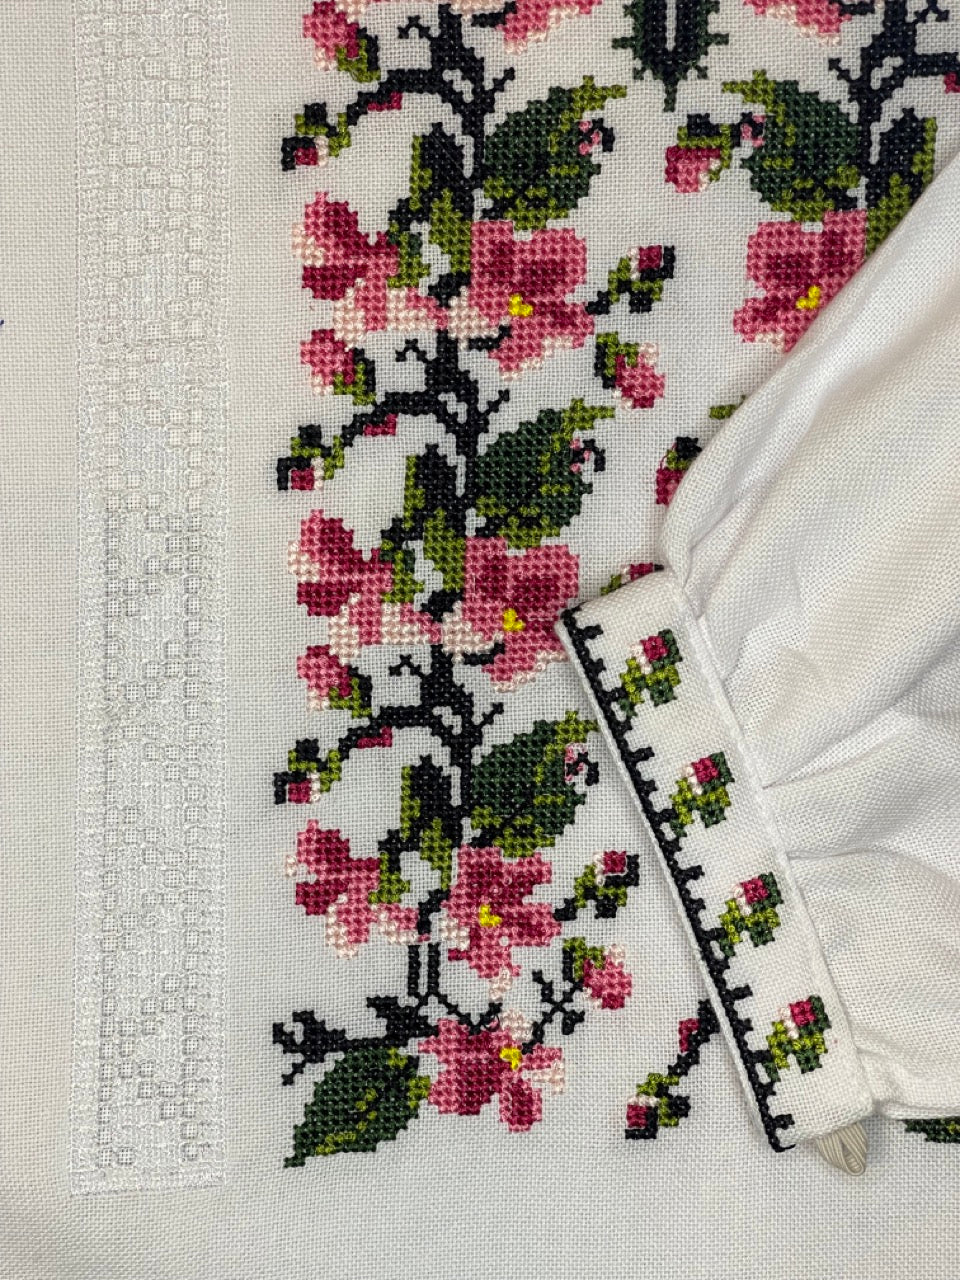 White Men's Vyshyvanka Shirt with Pink Embroidery